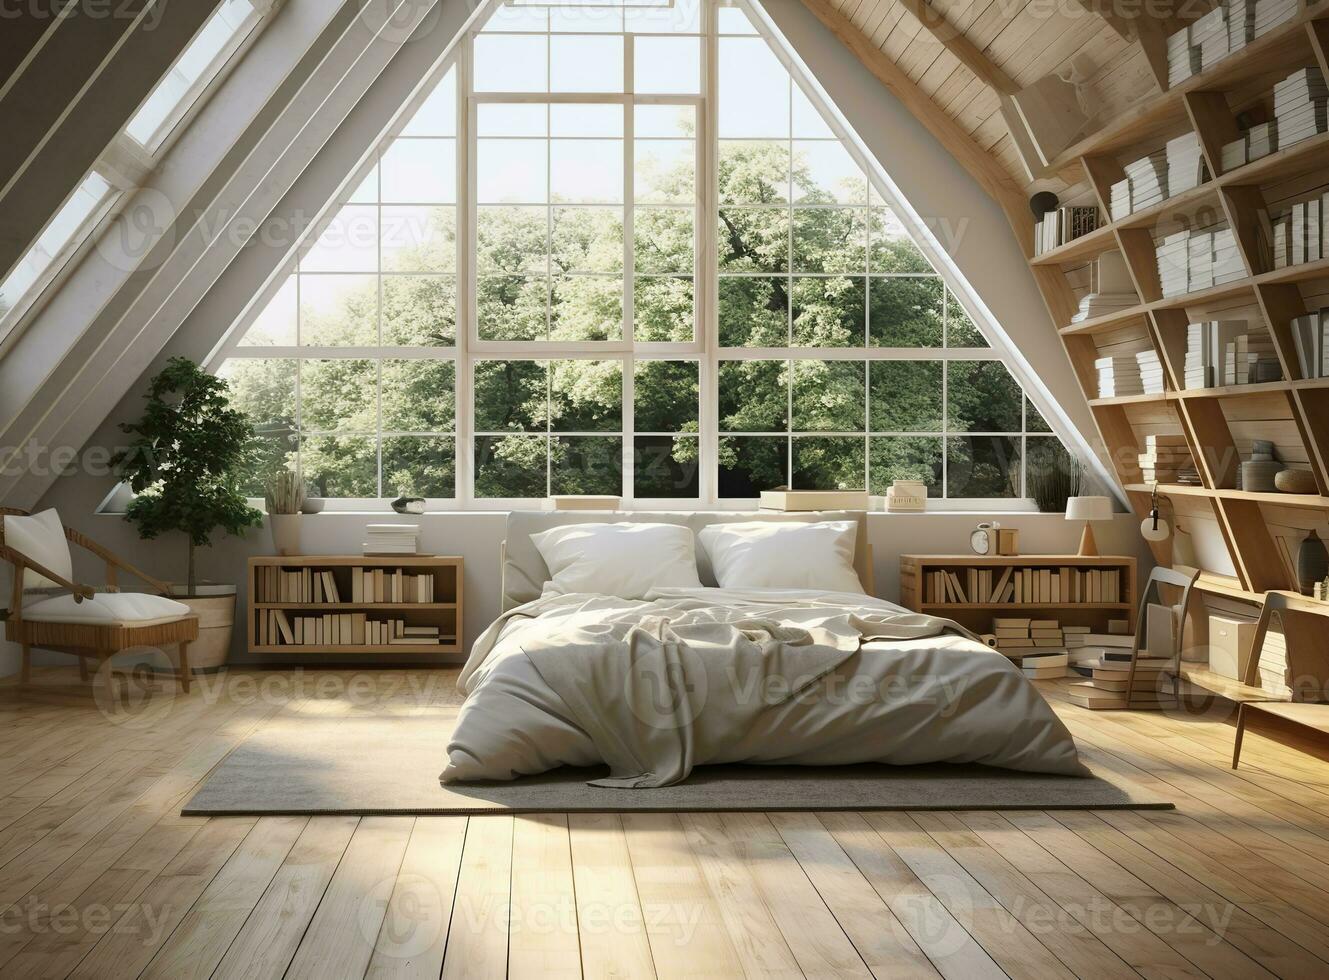 AI generated Inviting rustic attic bedroom with a bed, dresser, nightstand, rug, plants, and artwork. The room is decorated in a neutral color palette with exposed wood beams, white walls photo